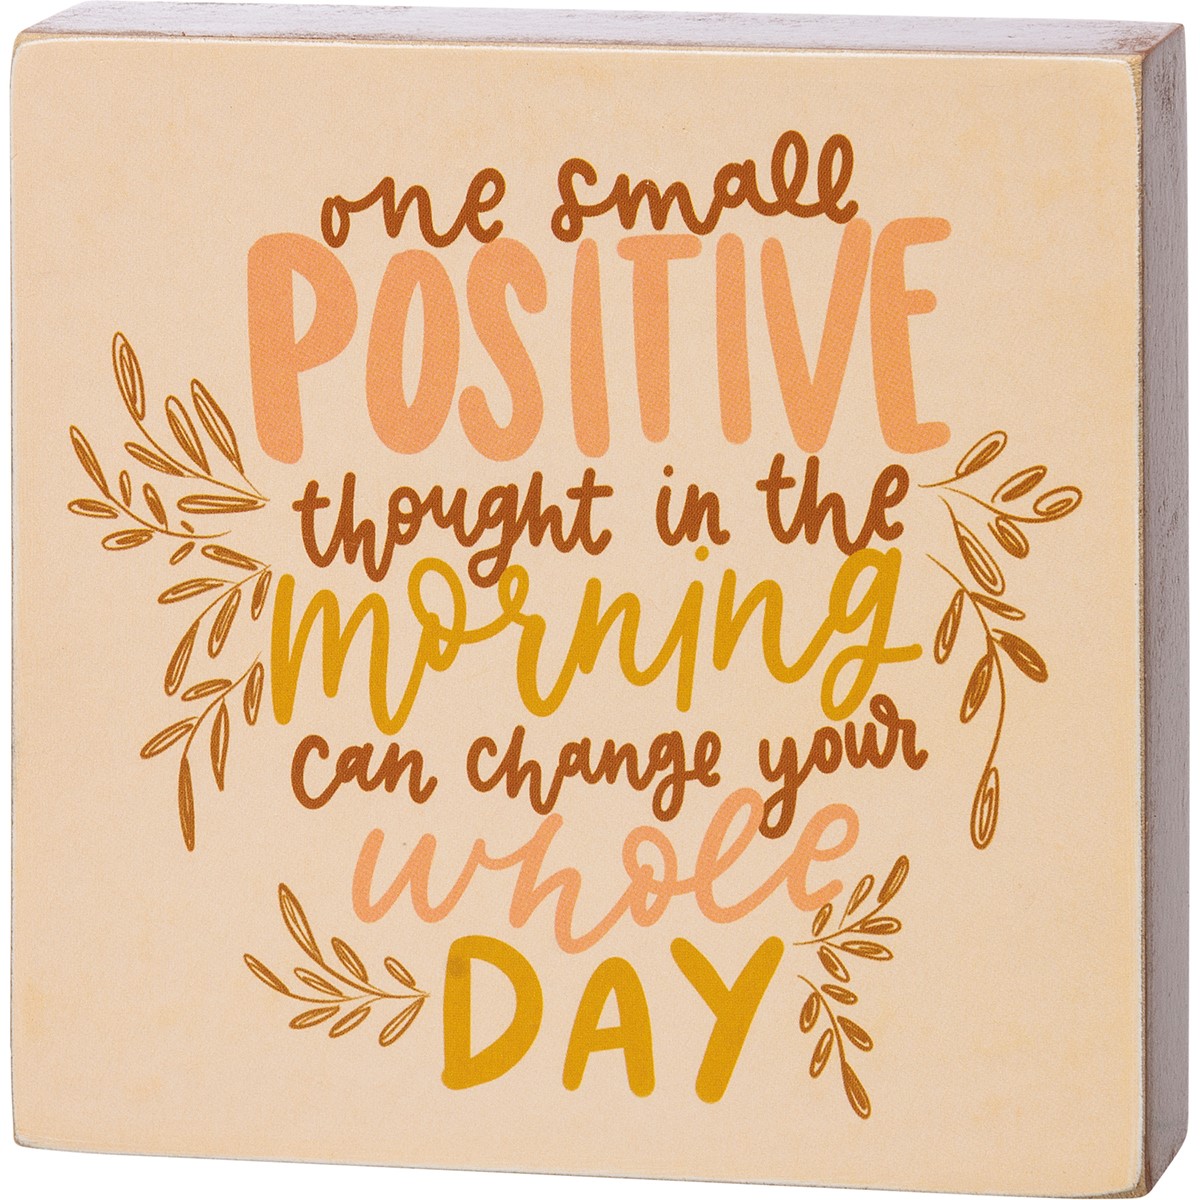 Small Positive Thought Block Sign - Wood, Paper